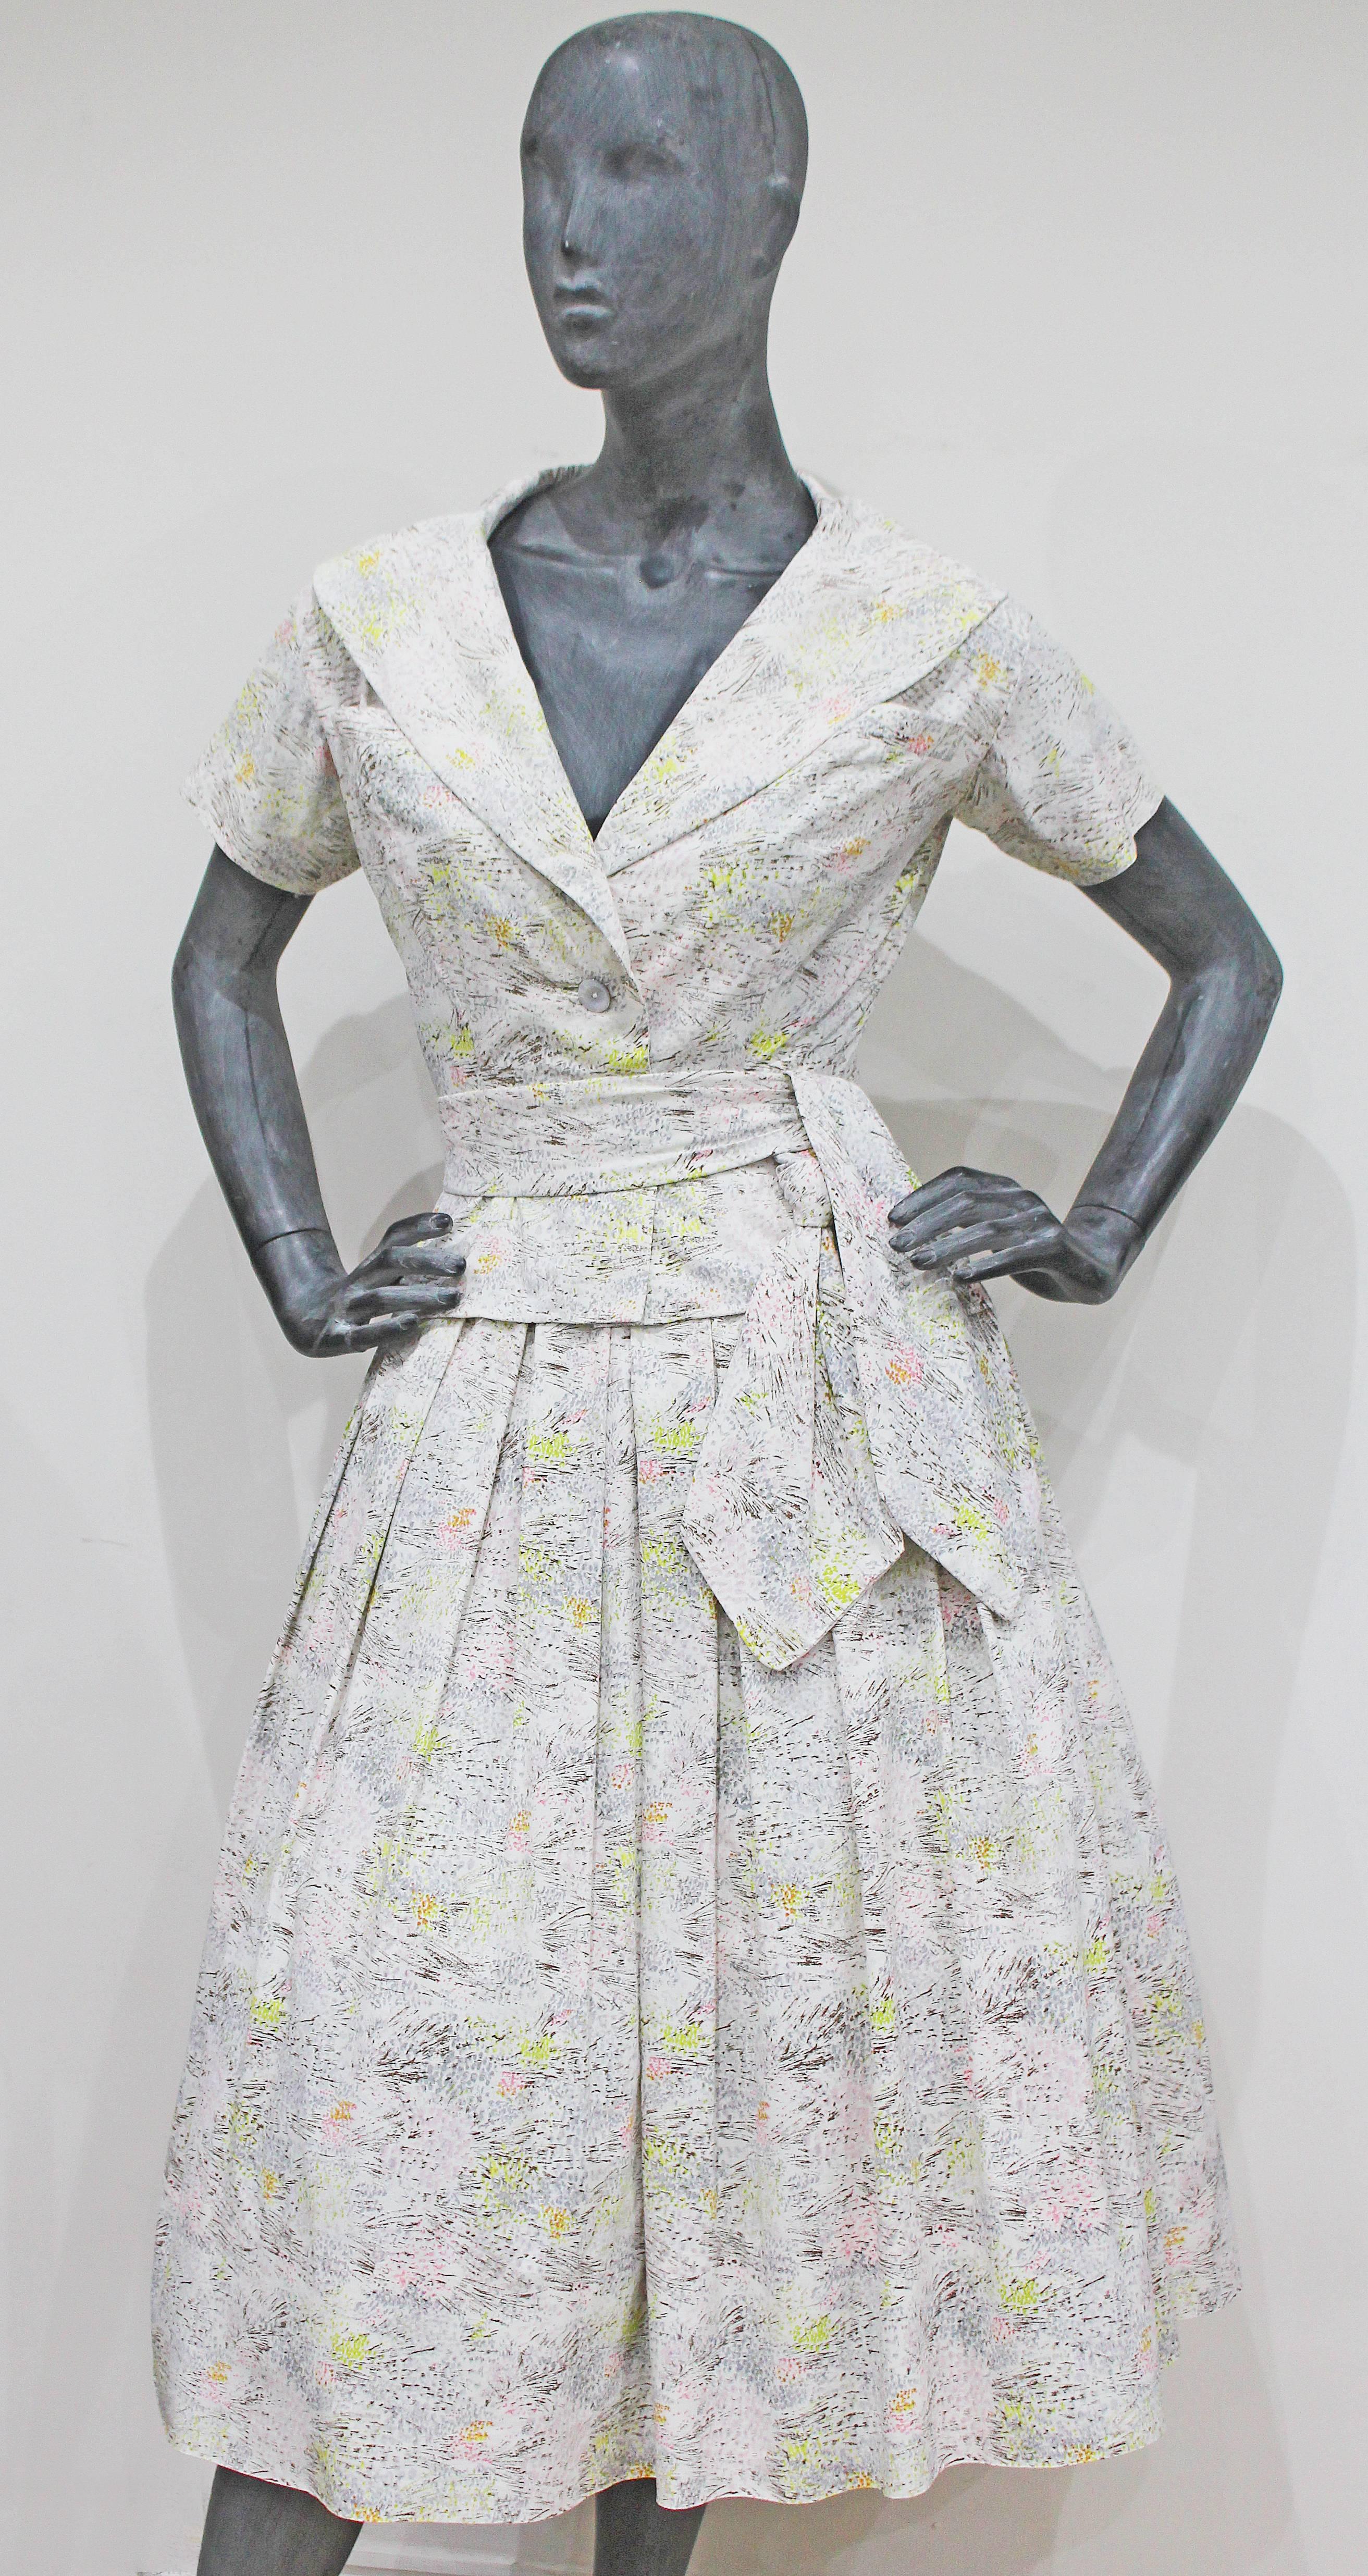 An exceptional Christian Dior Haute Couture 'Lily of the Valley' silk dress suit from the Spring/Summer 1954 collection. The two piece suit consists of a short sleeved jacket a full pleated skirt and a waist belt. The jacket is cut in a classic Dior